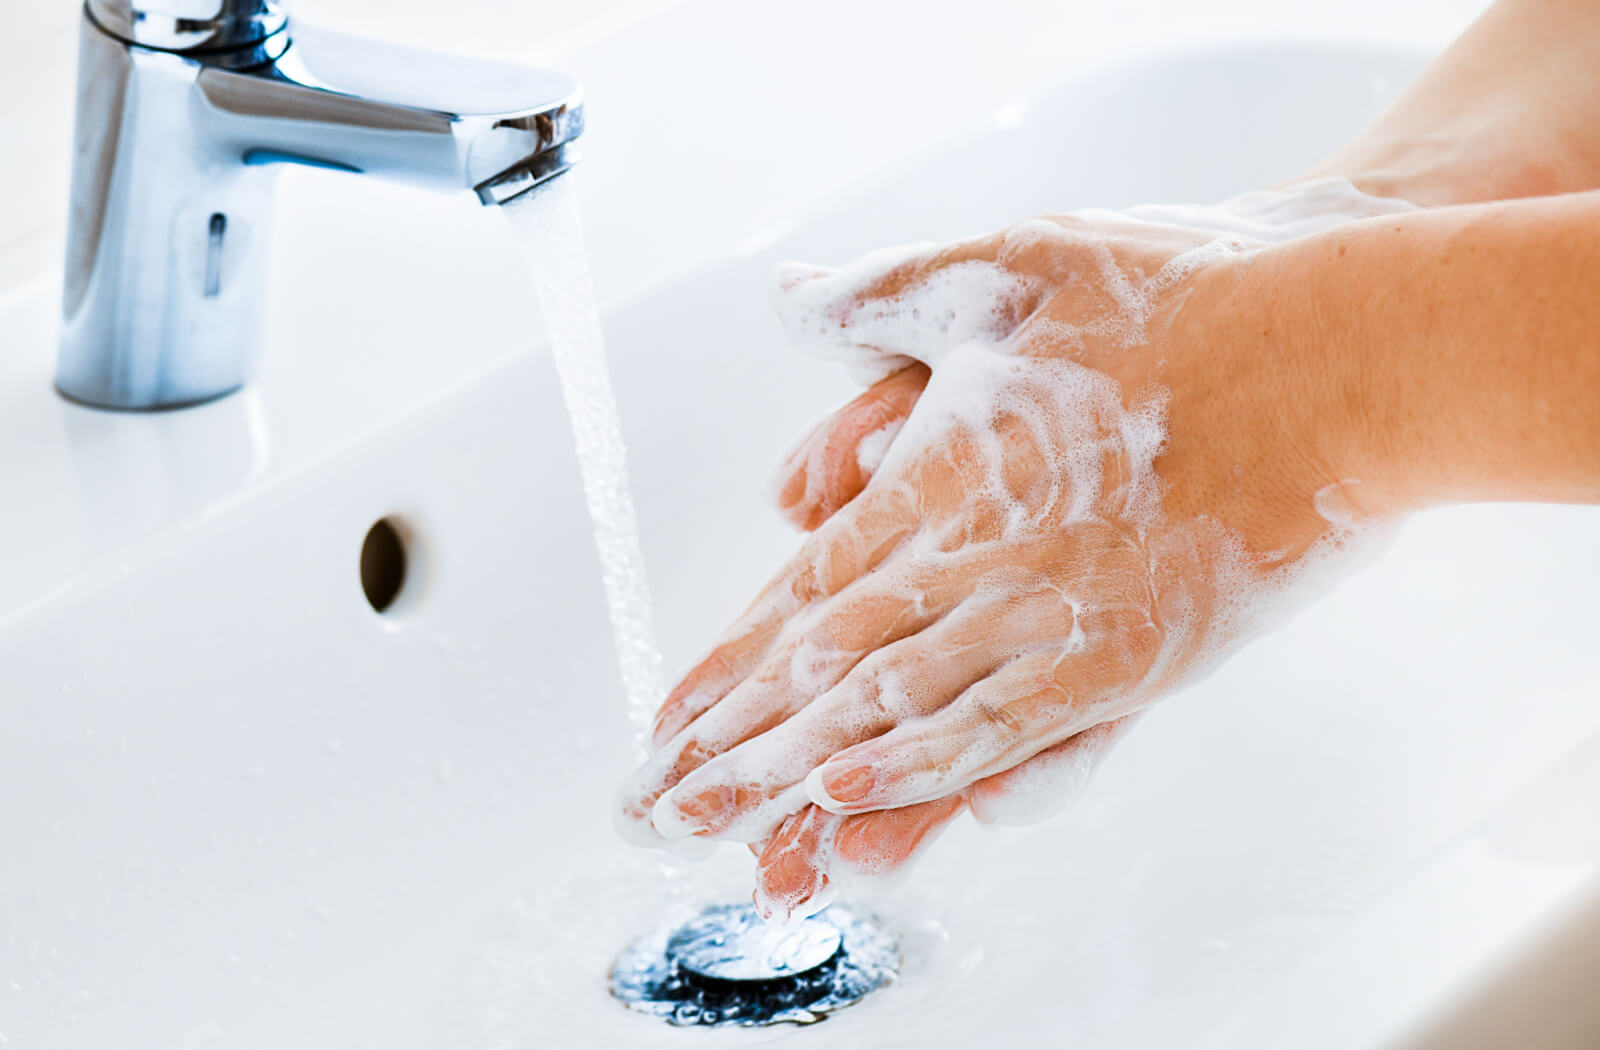 A close-up of someone washing their hands with soap and water